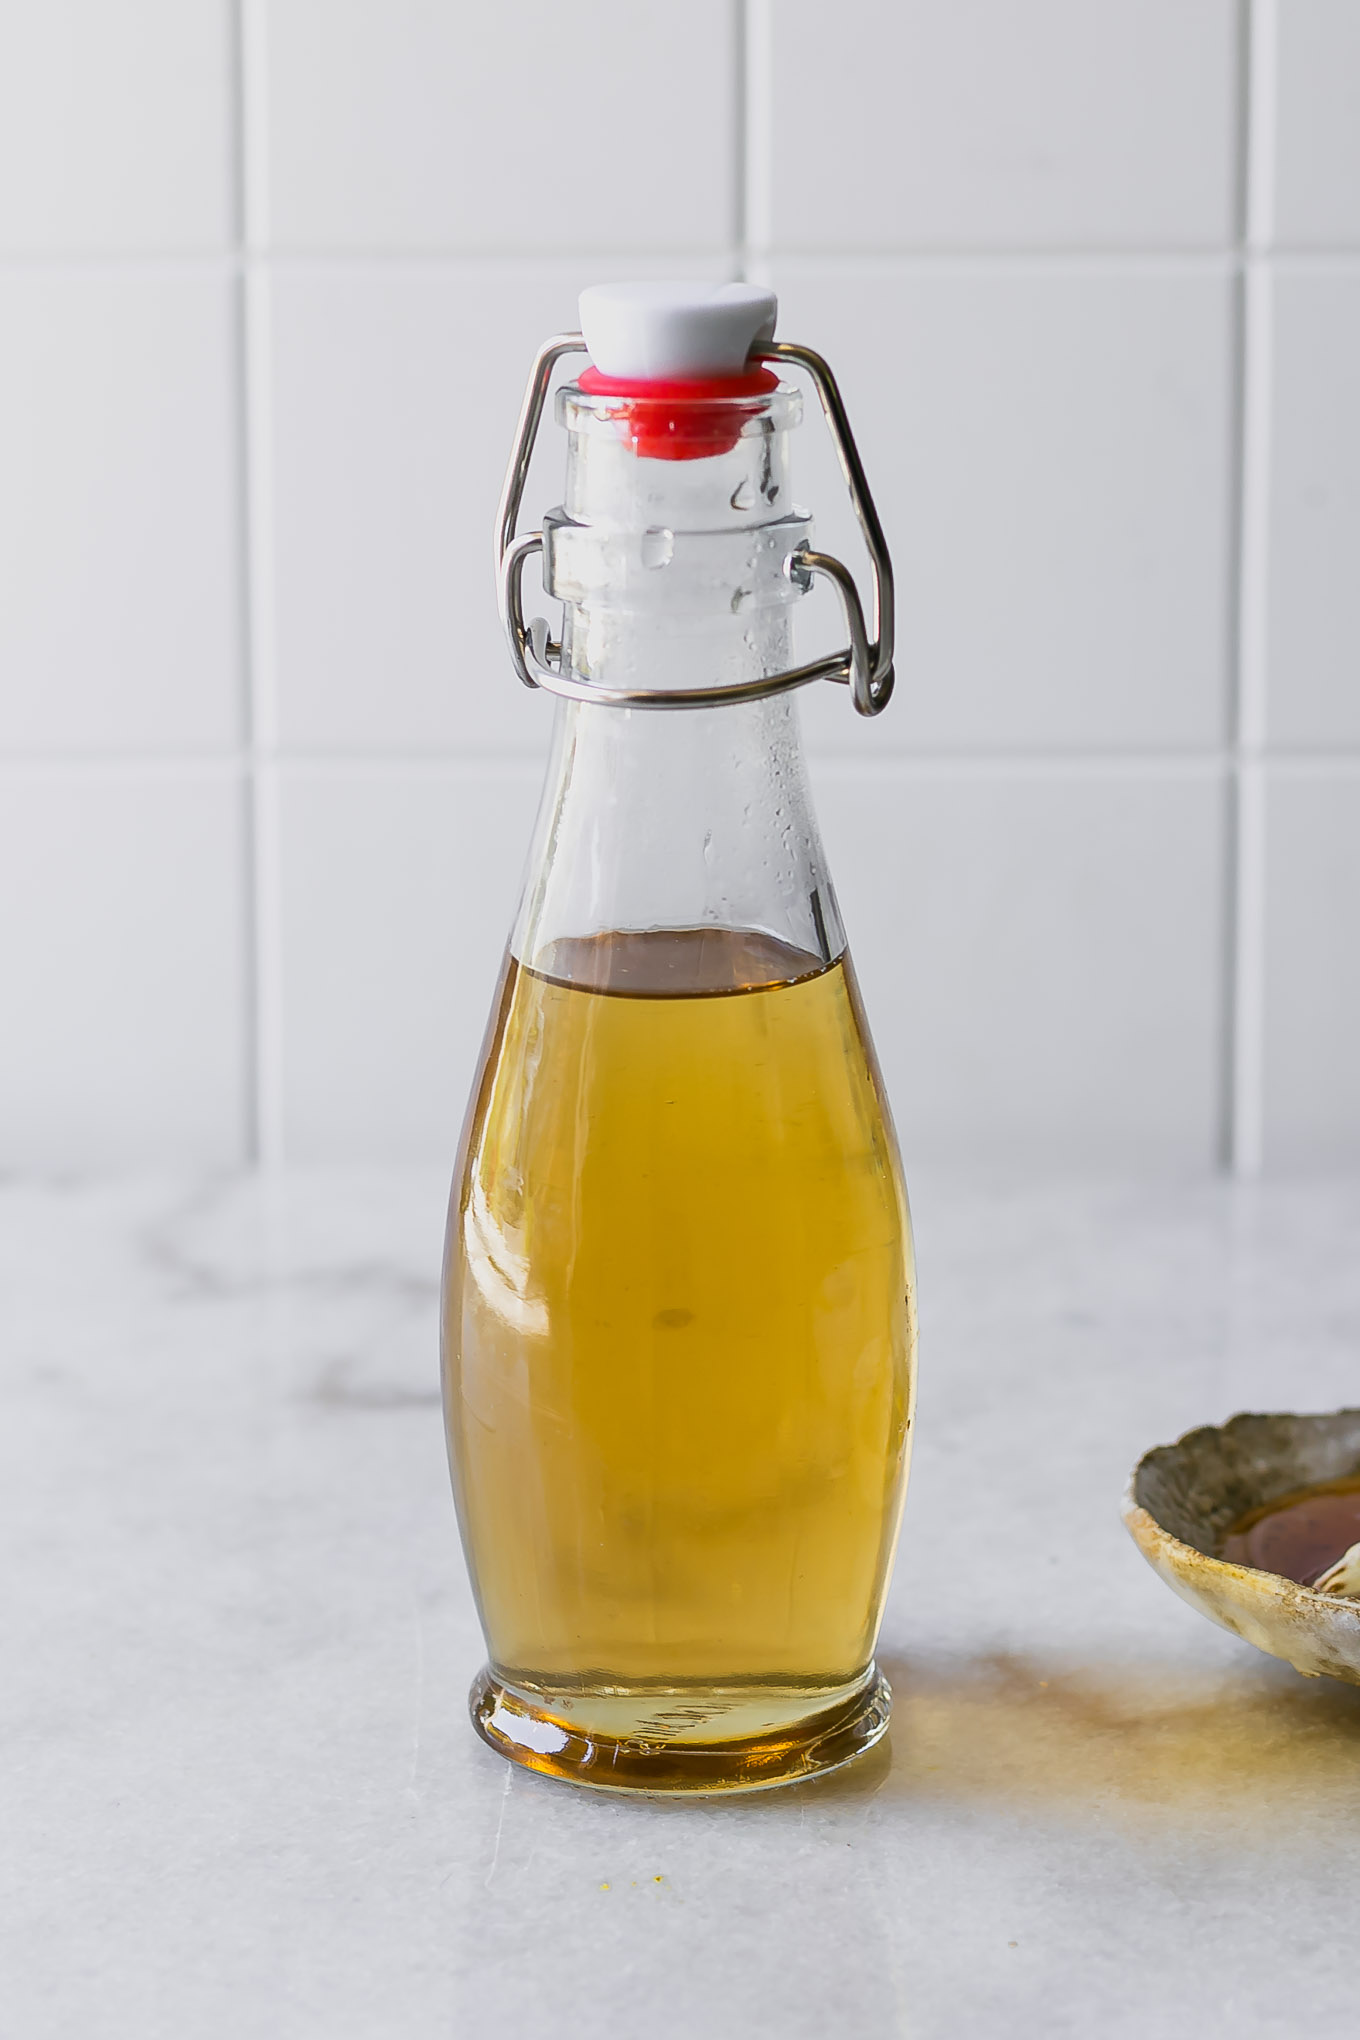 honey and lavender-infused simple syrup on a white table